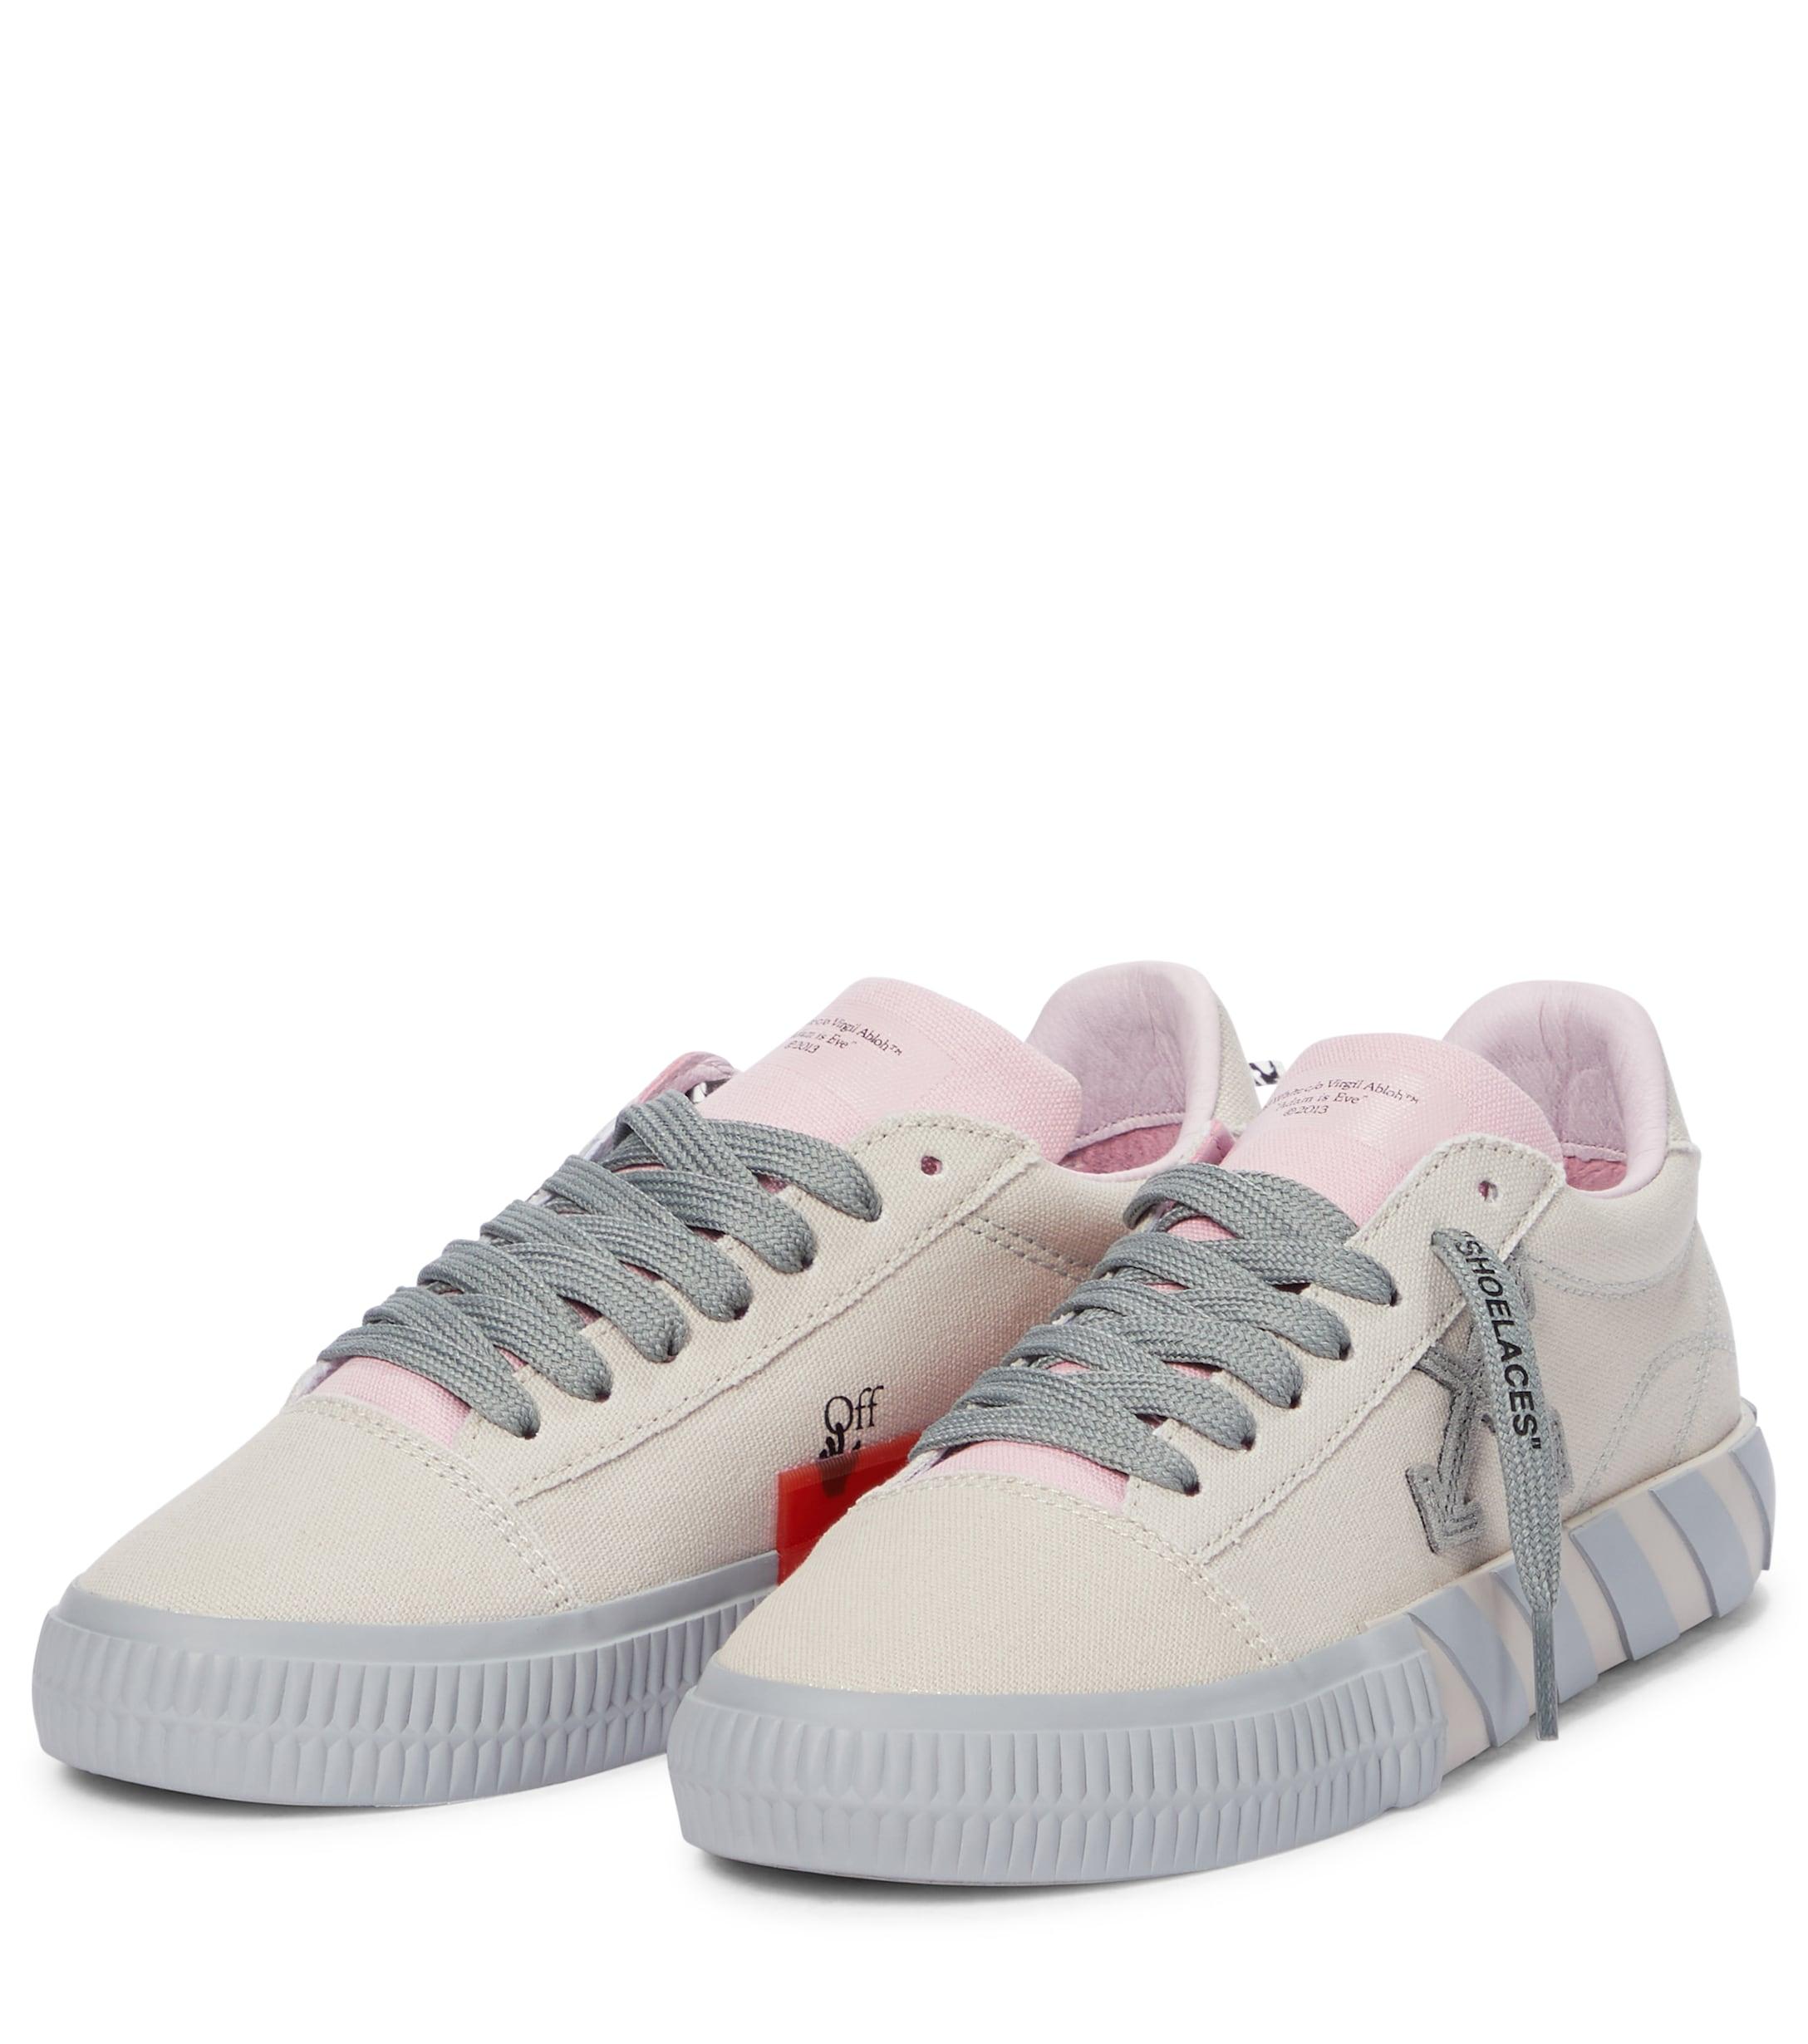 Off-White c/o Virgil Abloh Vulcanized Canvas Sneakers in Beige 